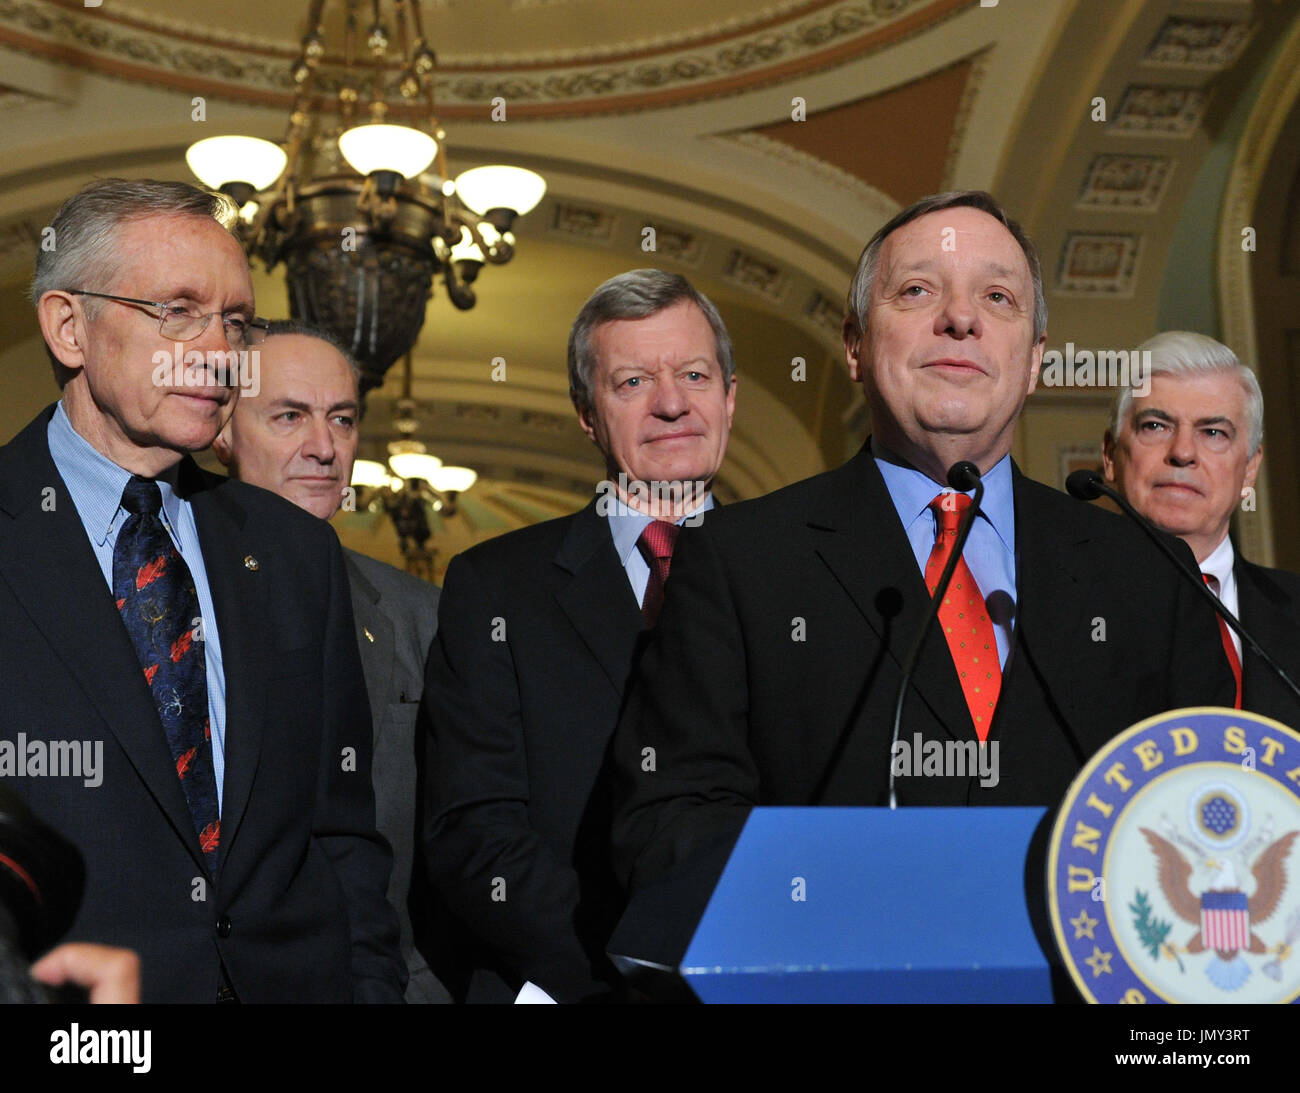 Washington, DC - December 24, 2009 -- United States Senator Dick Durbin (Democrat of Illinois) makes remarks after voting to pass H.R. 3590, regarding health care reform in the U.S. Capitol on Thursday, December 24, 2009.  The vote, which was along party lines, was 60 Democrats in favor and 39 Republicans against.  From left to right: U.S. Senate Majority Leader Harry Reid (Democrat of Nevada), U.S. Senator Chuck Schumer (Democrat of New York), U.S. Senator Max Baucus (Democrat of Montana), Senator Durbin, and U.S. Senator Christopher Dodd (Democrat of Connecticut)..Credit: Ron Sachs / CNP.(RE Stock Photo